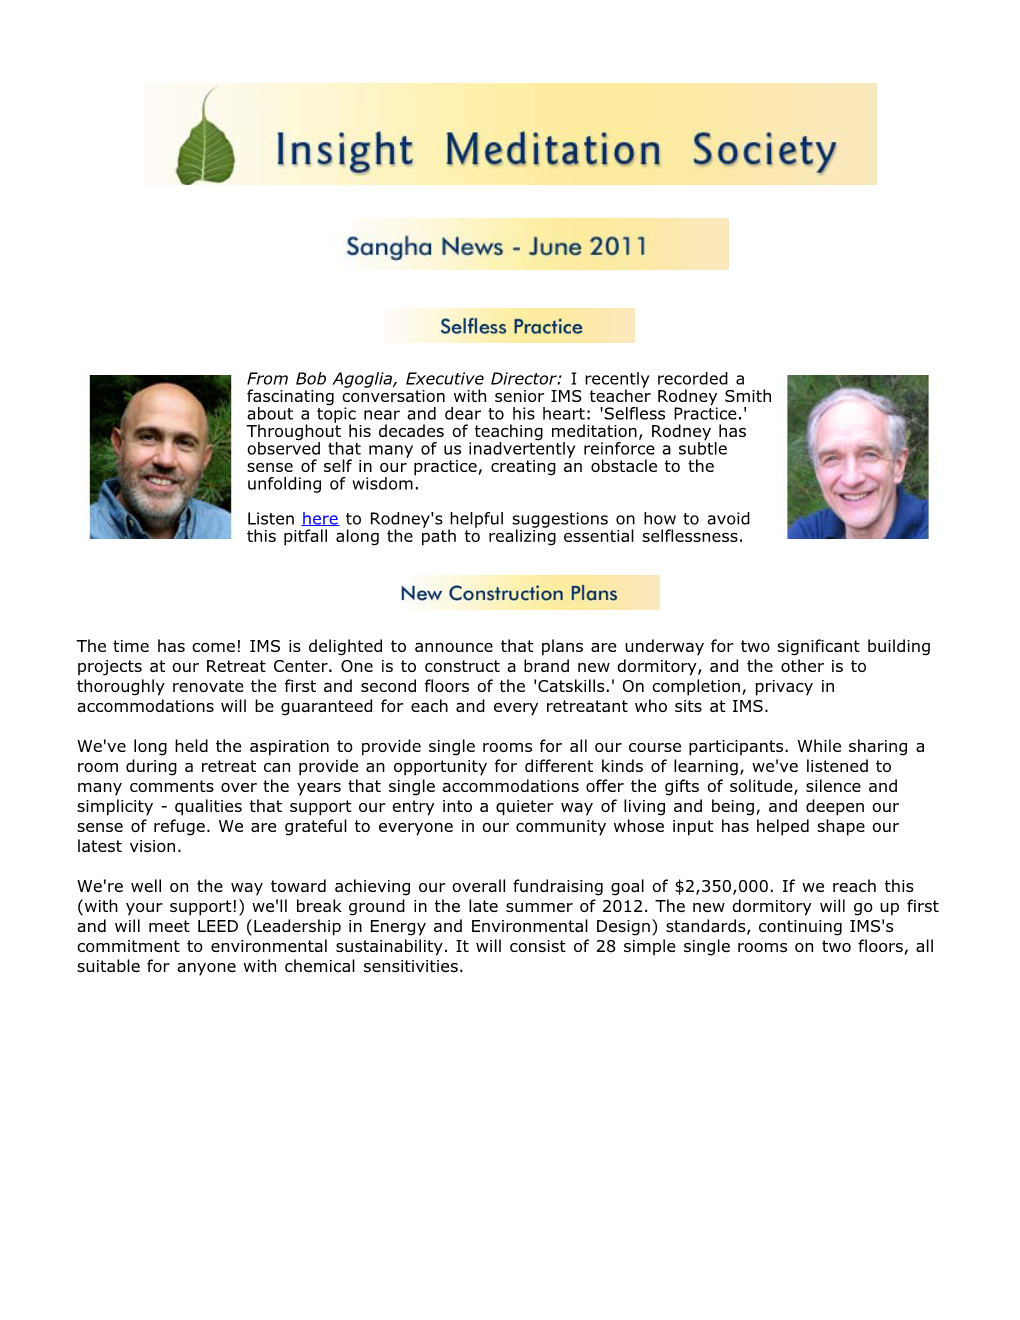 Sangha News and Links to Its Audio Interviews on Our Website